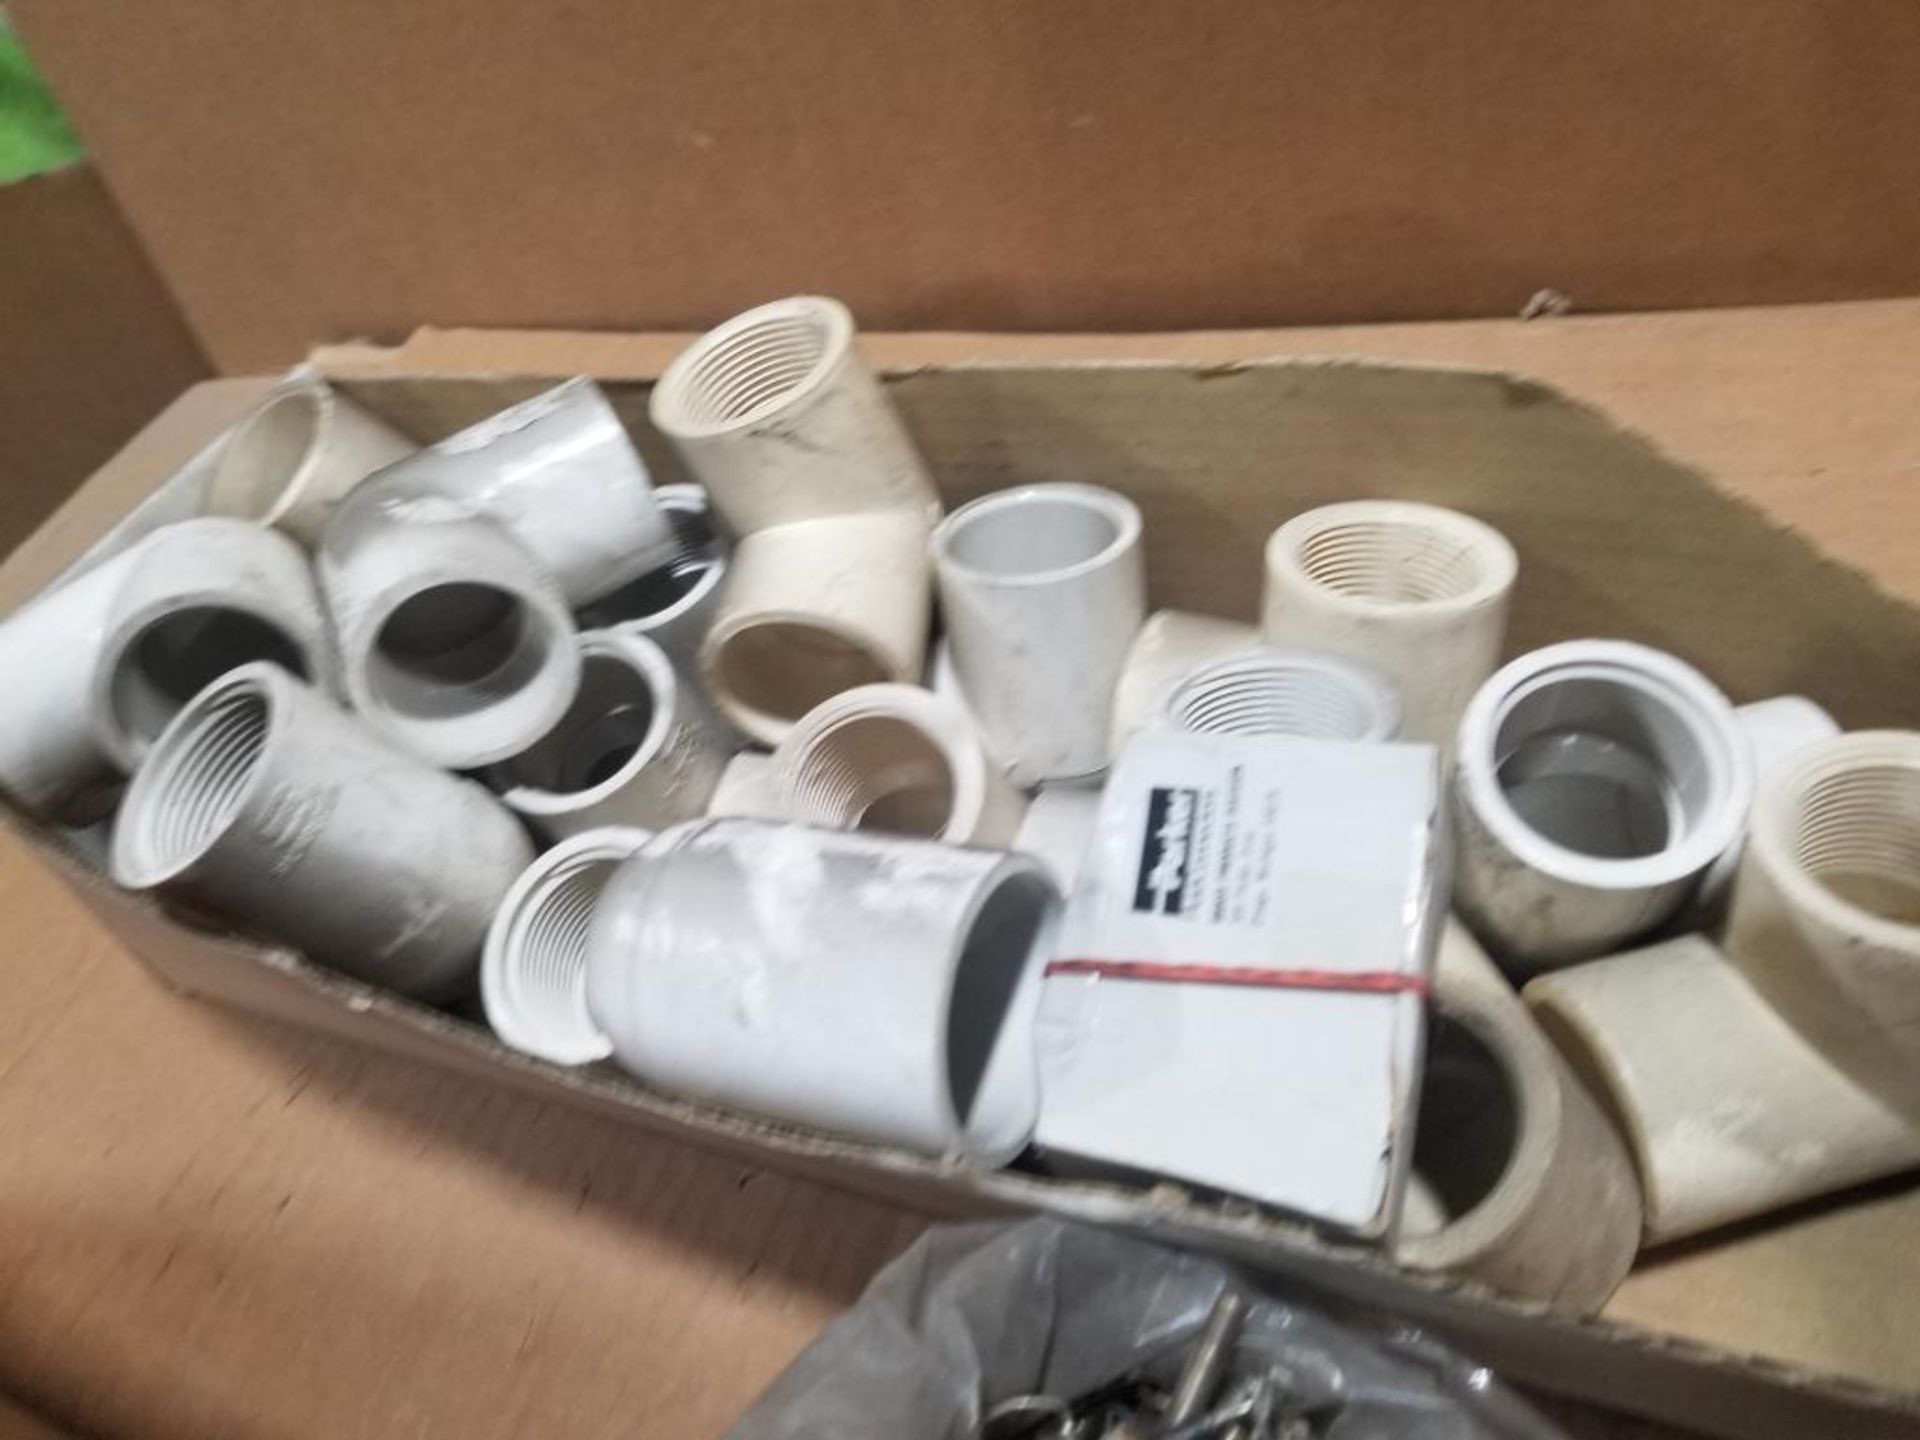 Large assortment of plumbing fittings, conduit, and hardware. - Image 4 of 13